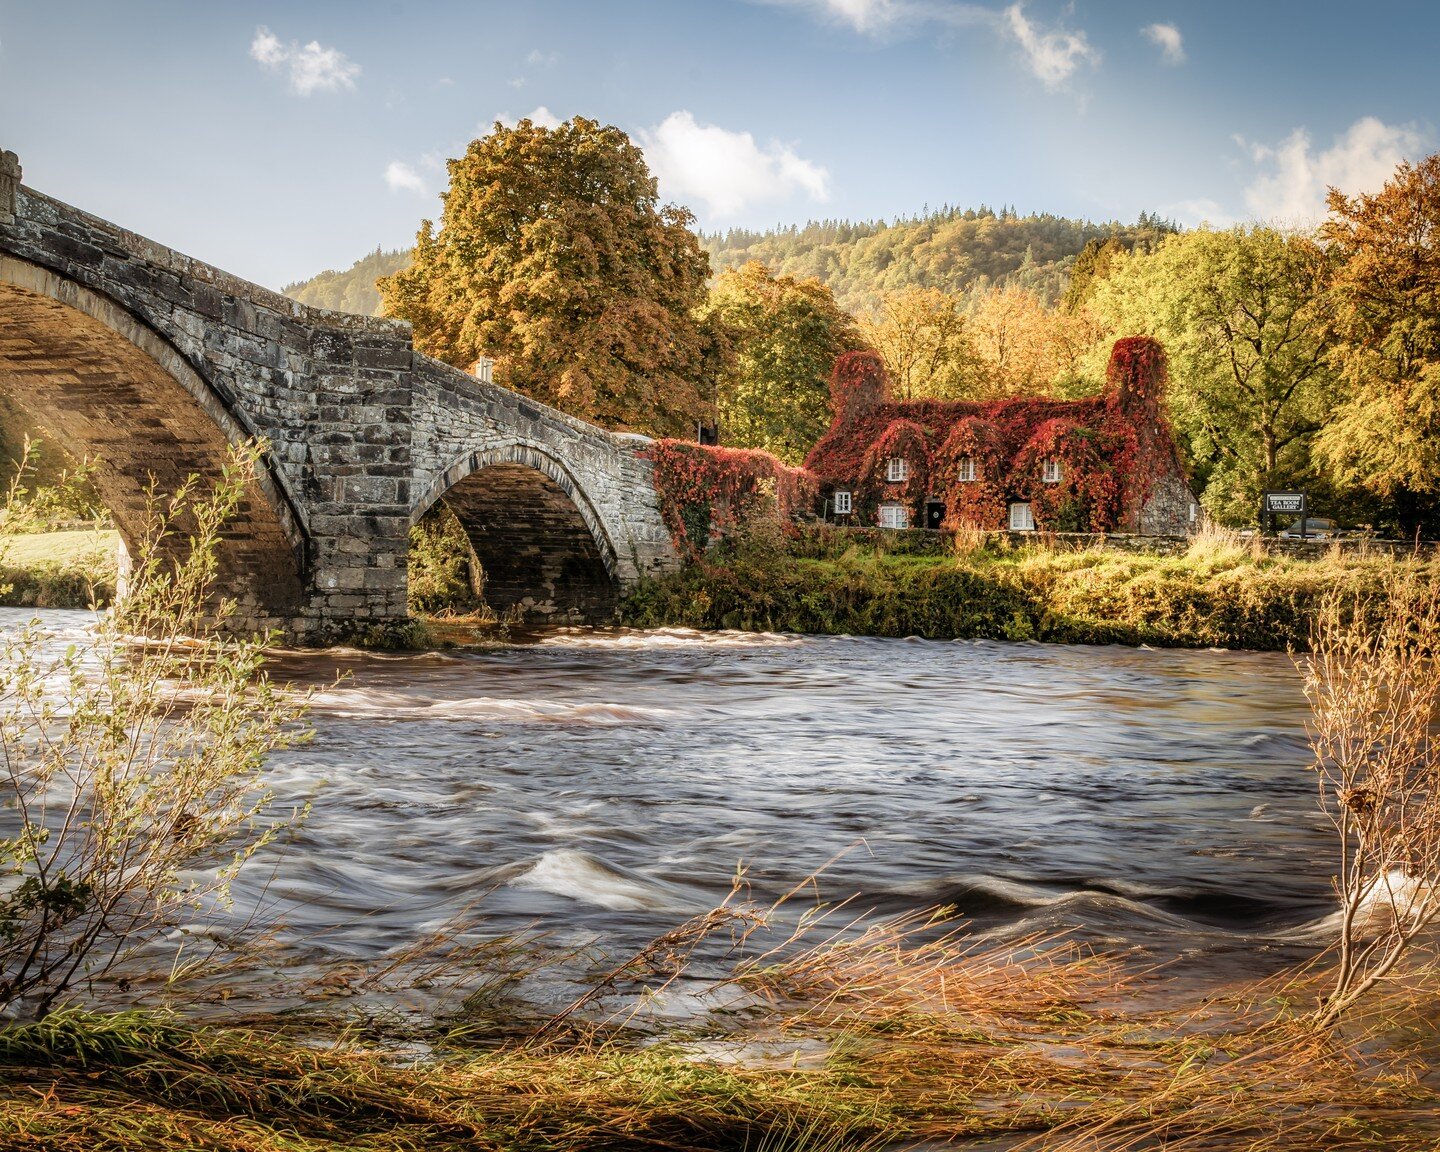 Lovely morning sunshine on this iconic scene this morning at Tu Hwnt i&rsquo;r Bont, Llanrwst, in the Conwy Valley
-
-
-
-
-
#tuhwntirbont 
#llanwrst 
#llanrwst 
#northwales 
#northwalestagram 
#northwalesinstagram 
#northwalesphotography 
#sonya7iii